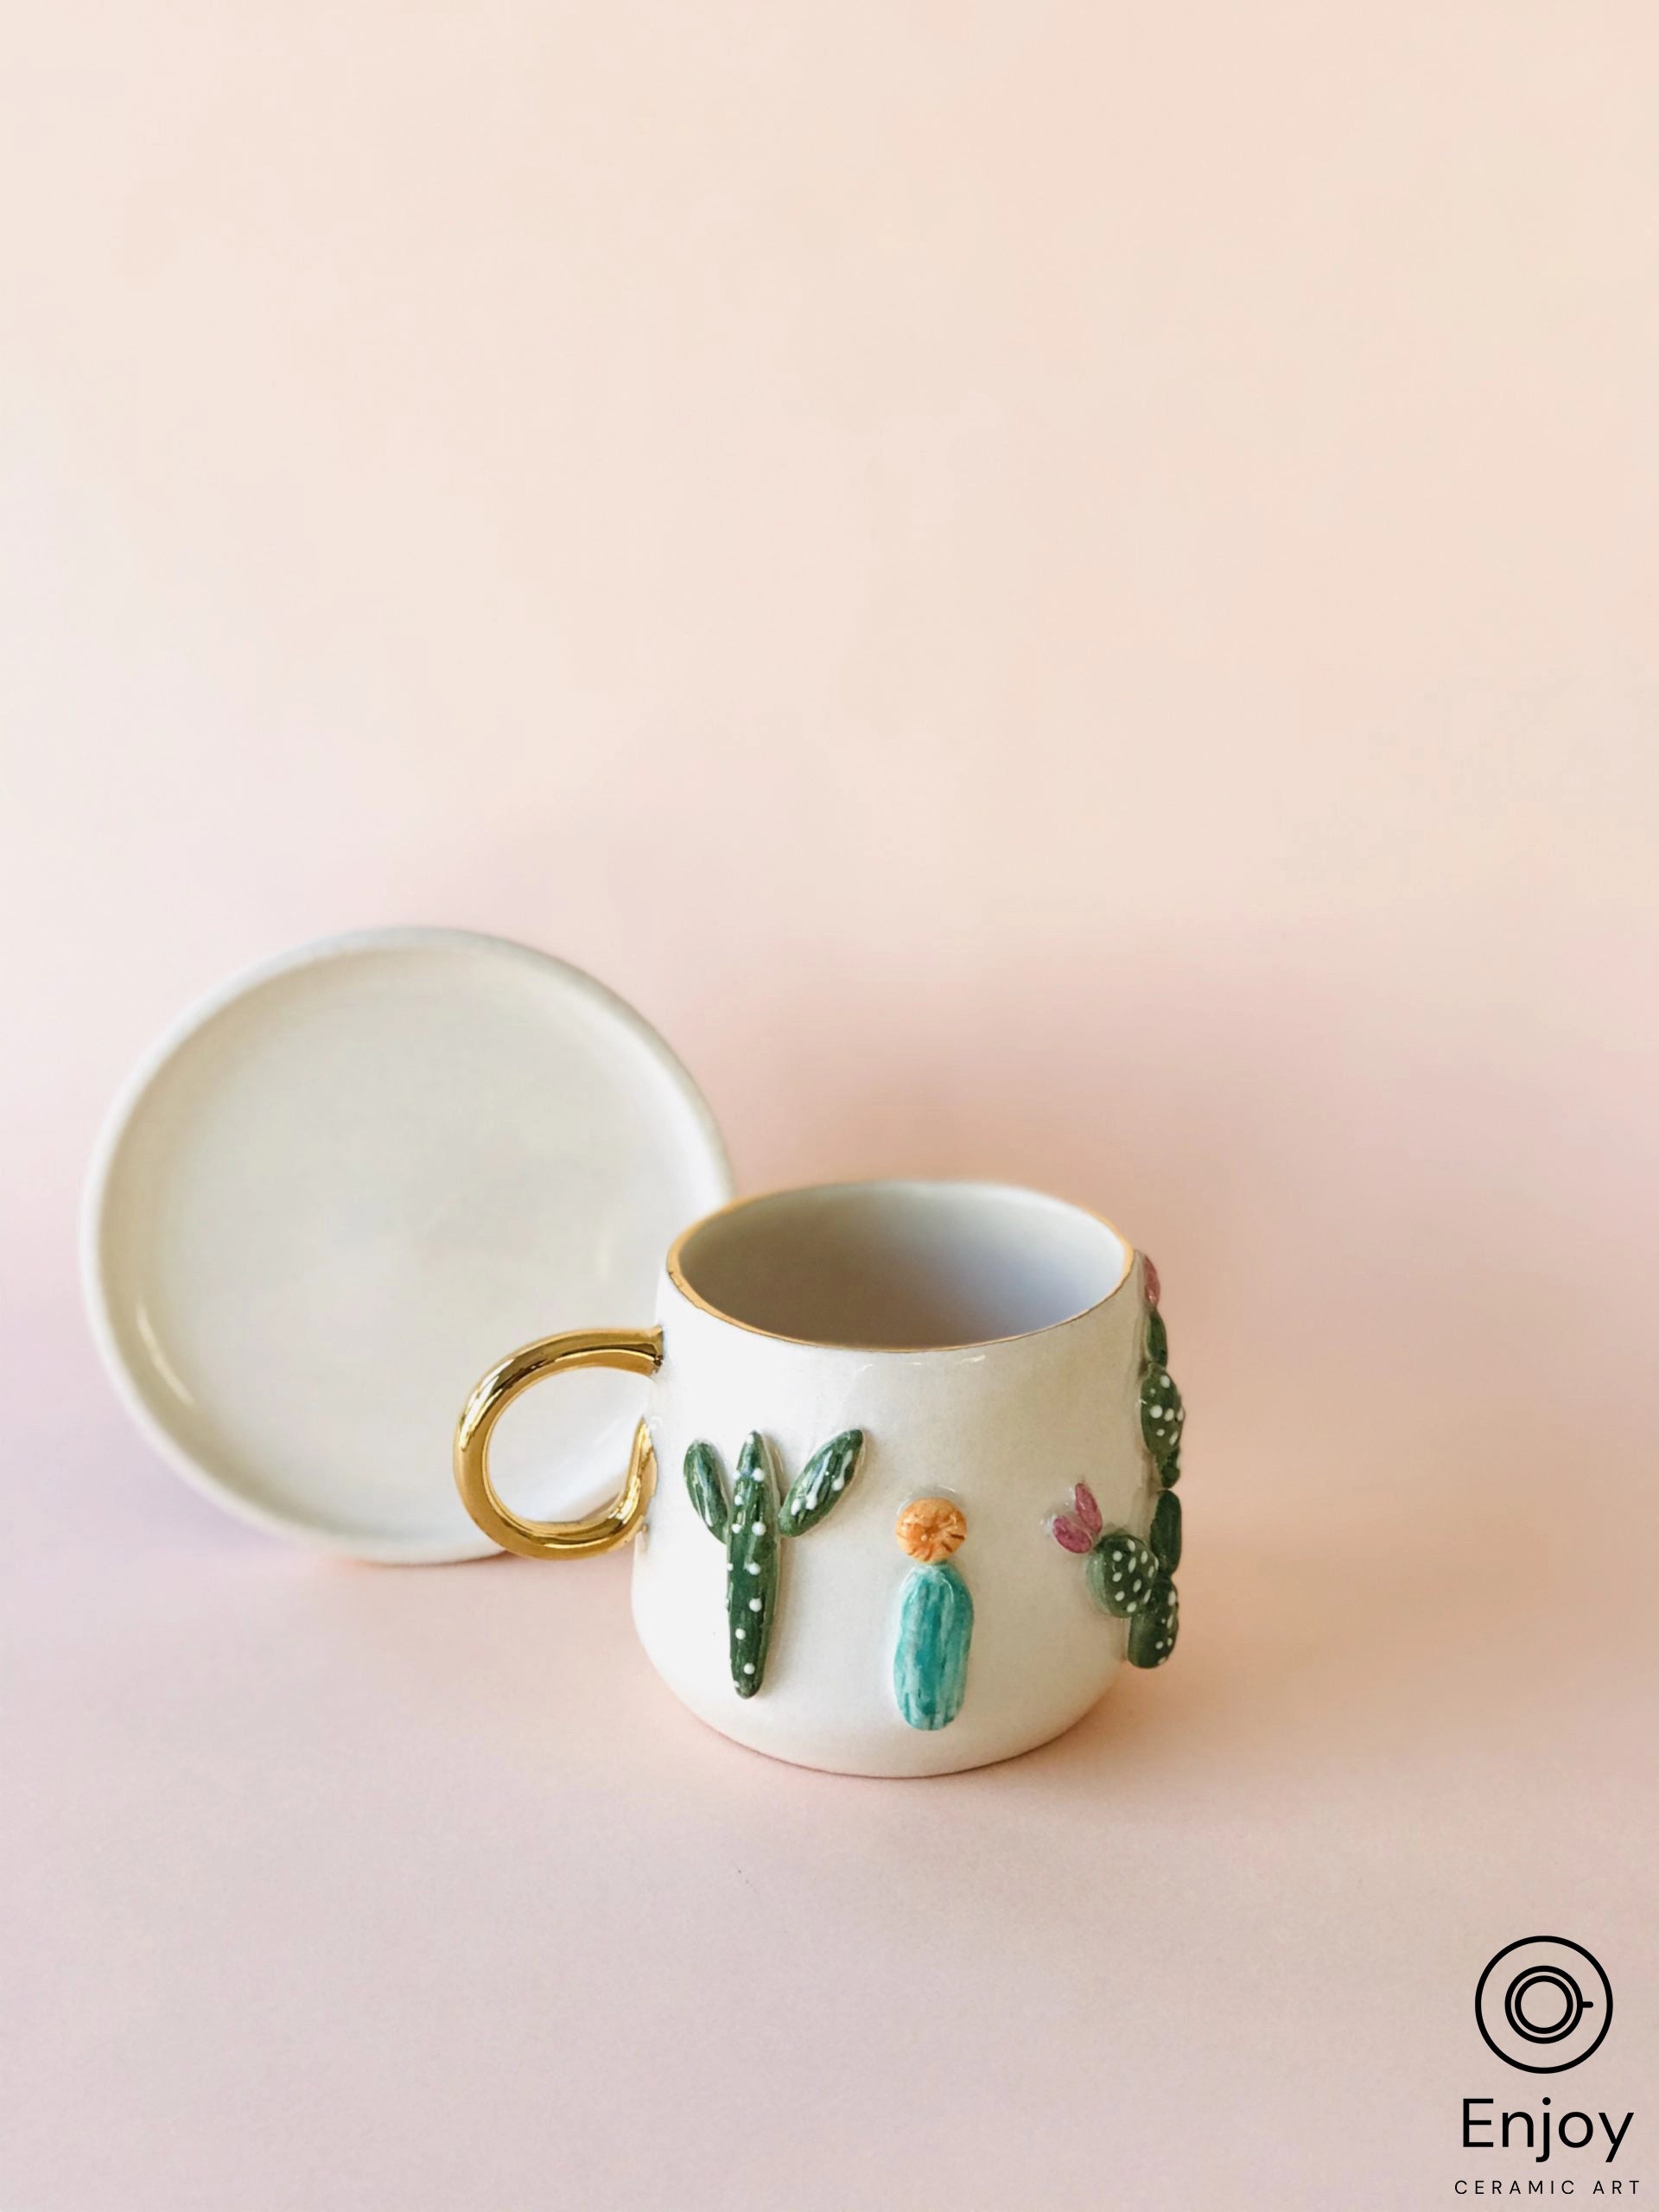 A ceramic mug with a gold handle, adorned with colorful 3D cactus motifs on a pastel pink background, conveys artistic and functional charm.